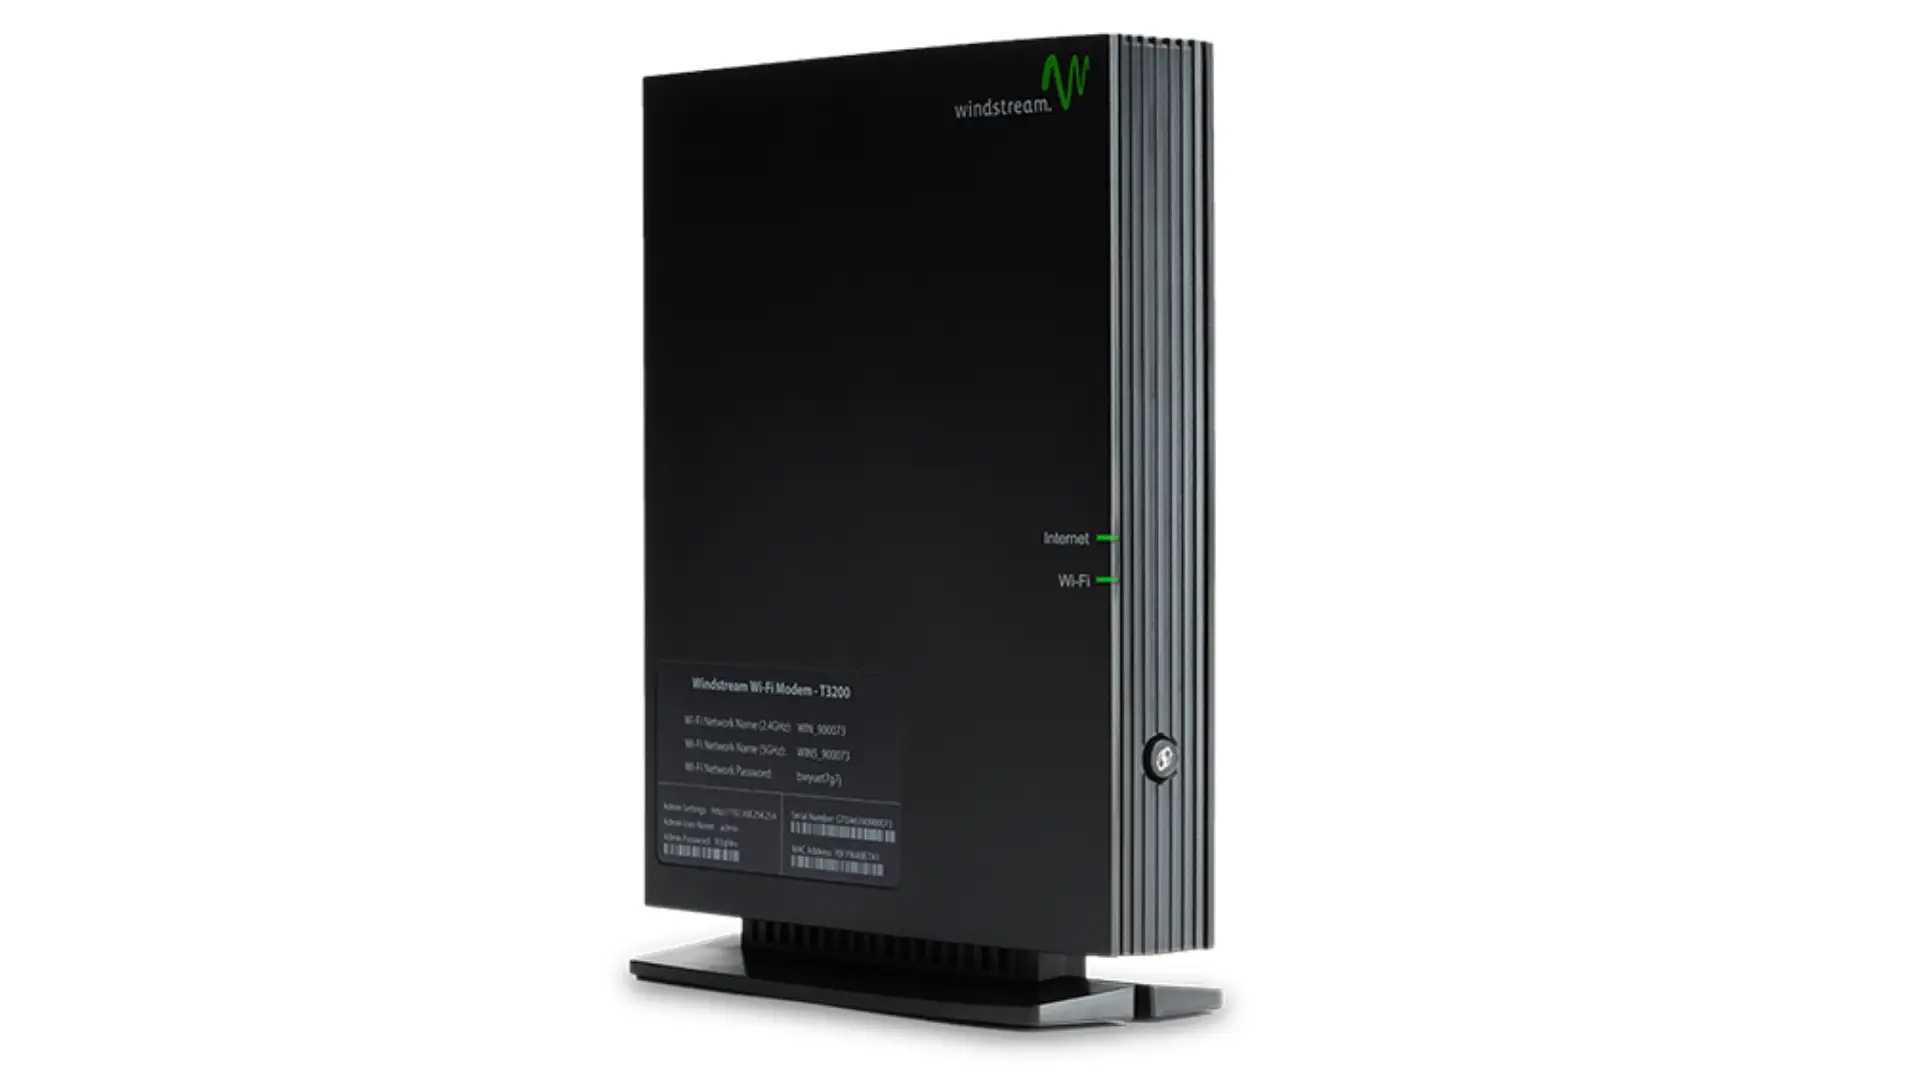 Actiontec T3200 wireless router.